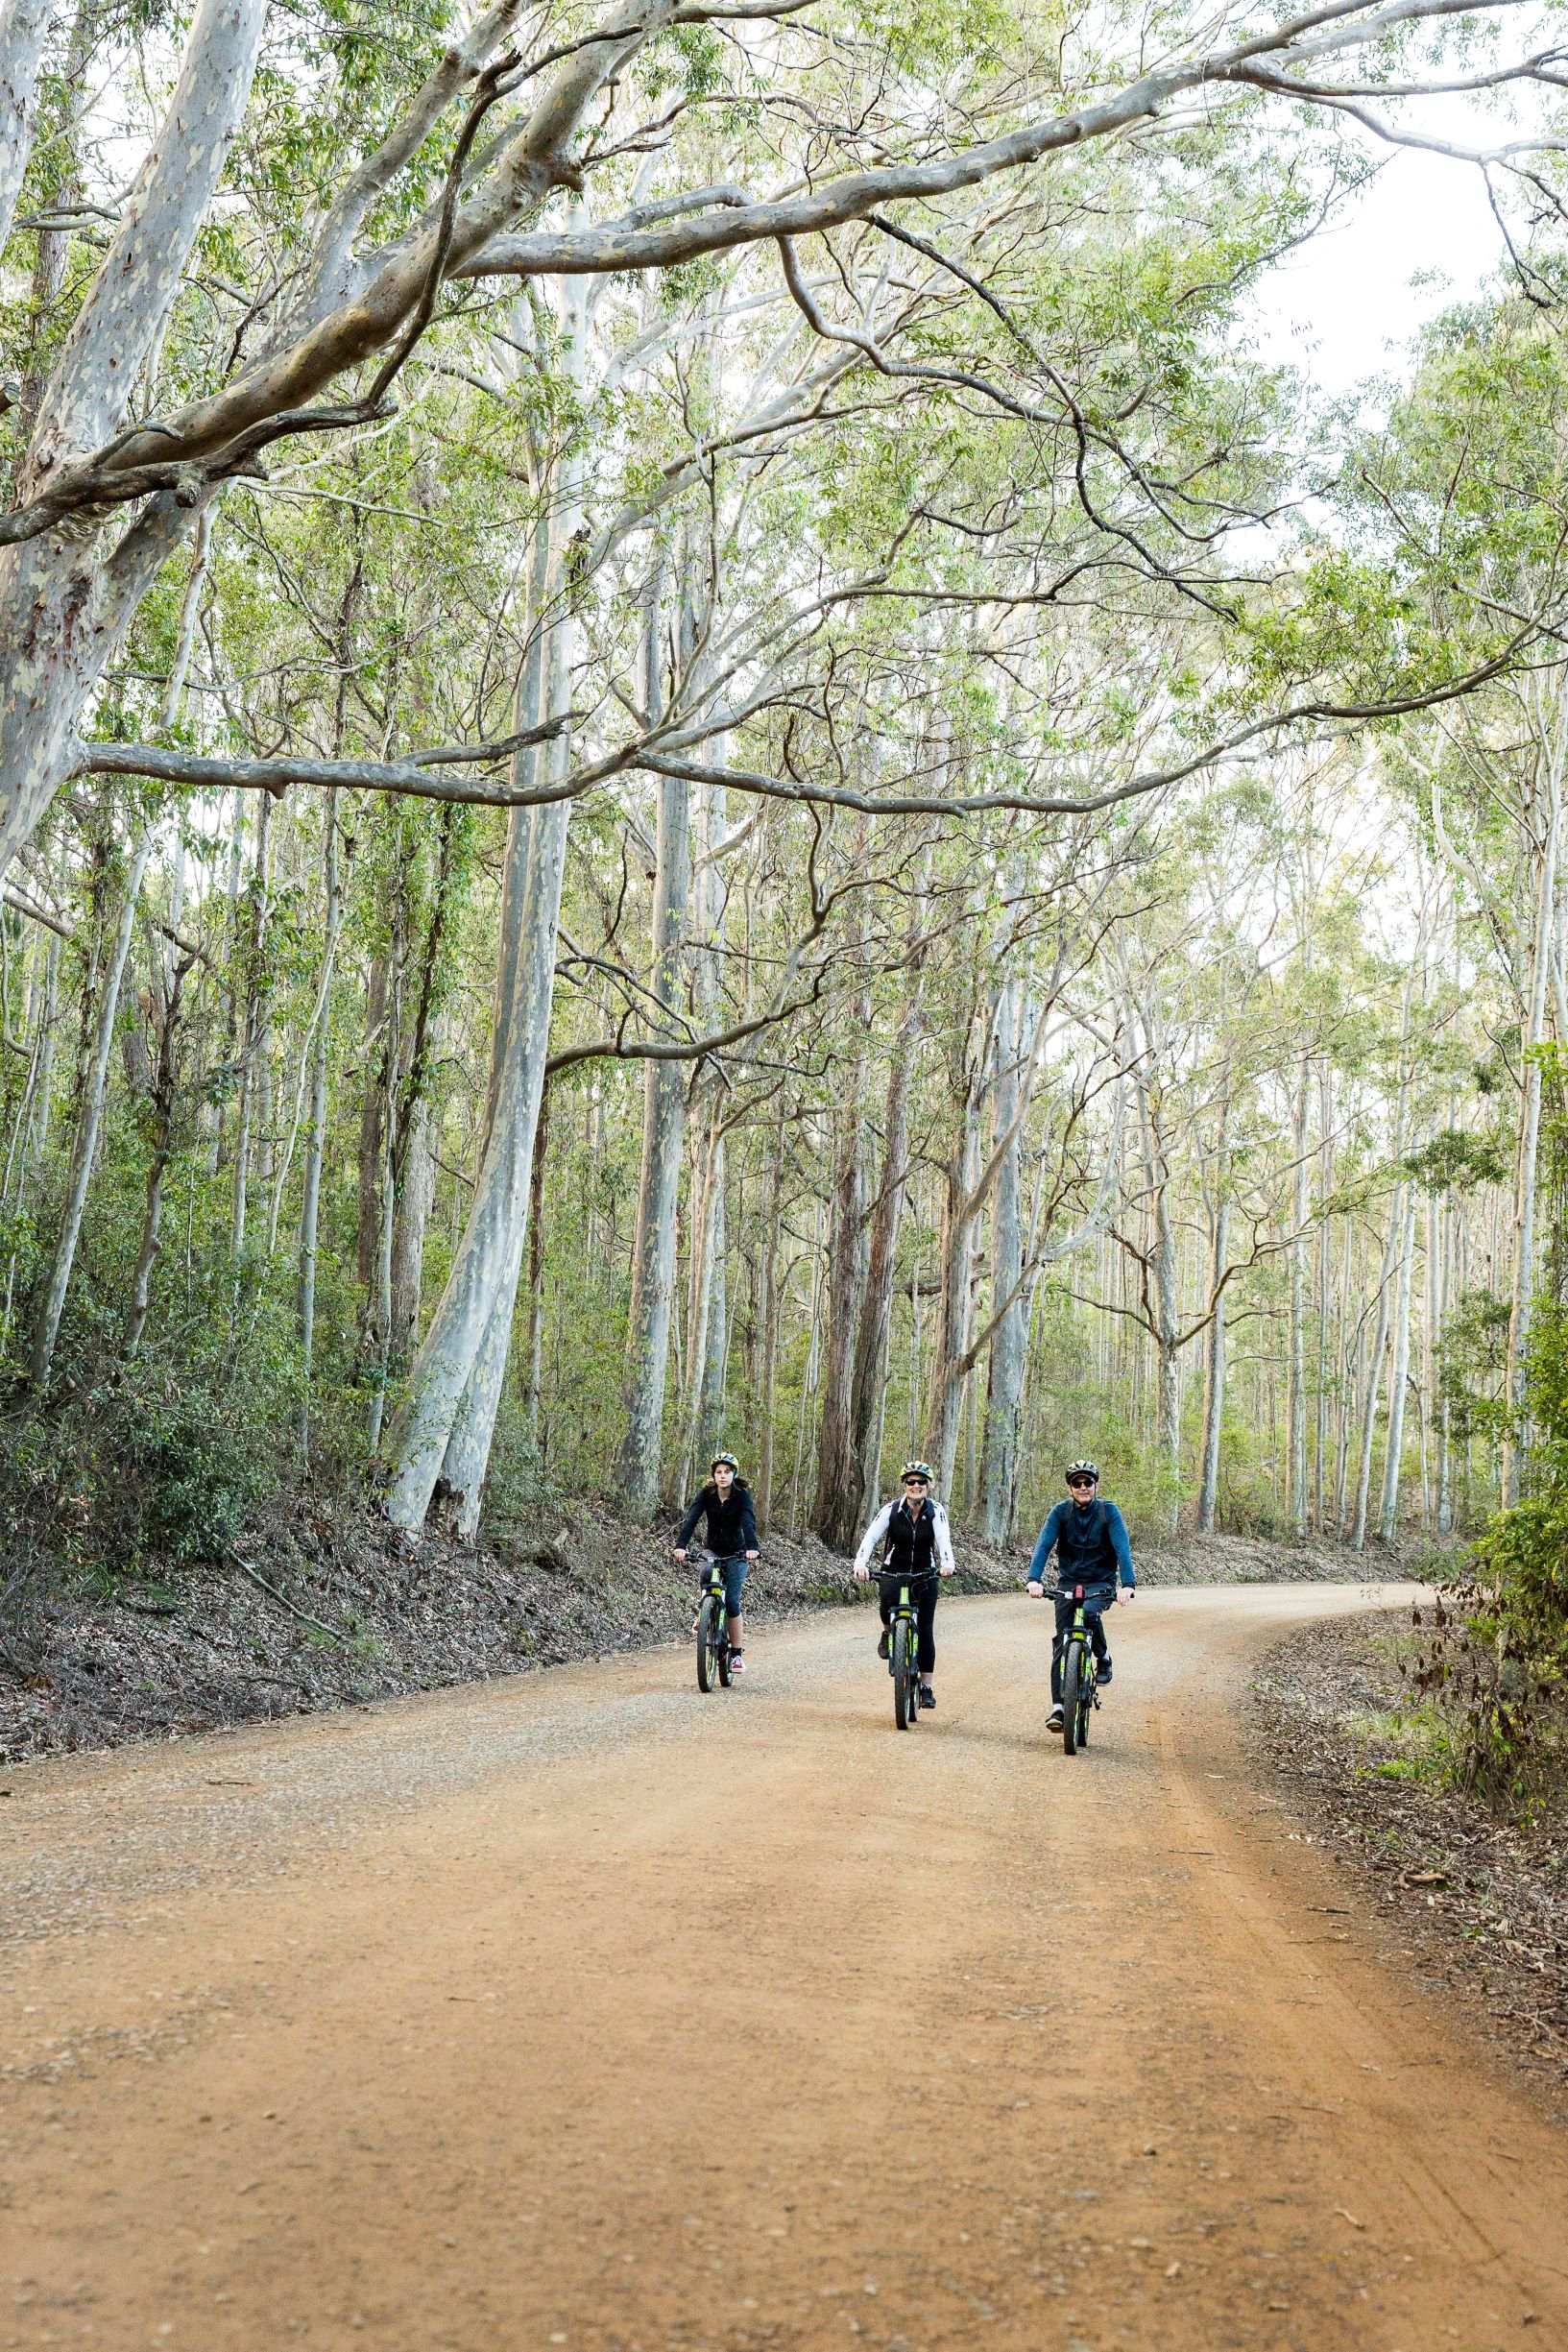 Discover Tilba by Electric Bike - 2 Day 2 Night Self Guided Cycle Tour - Departs and Returns from Narooma